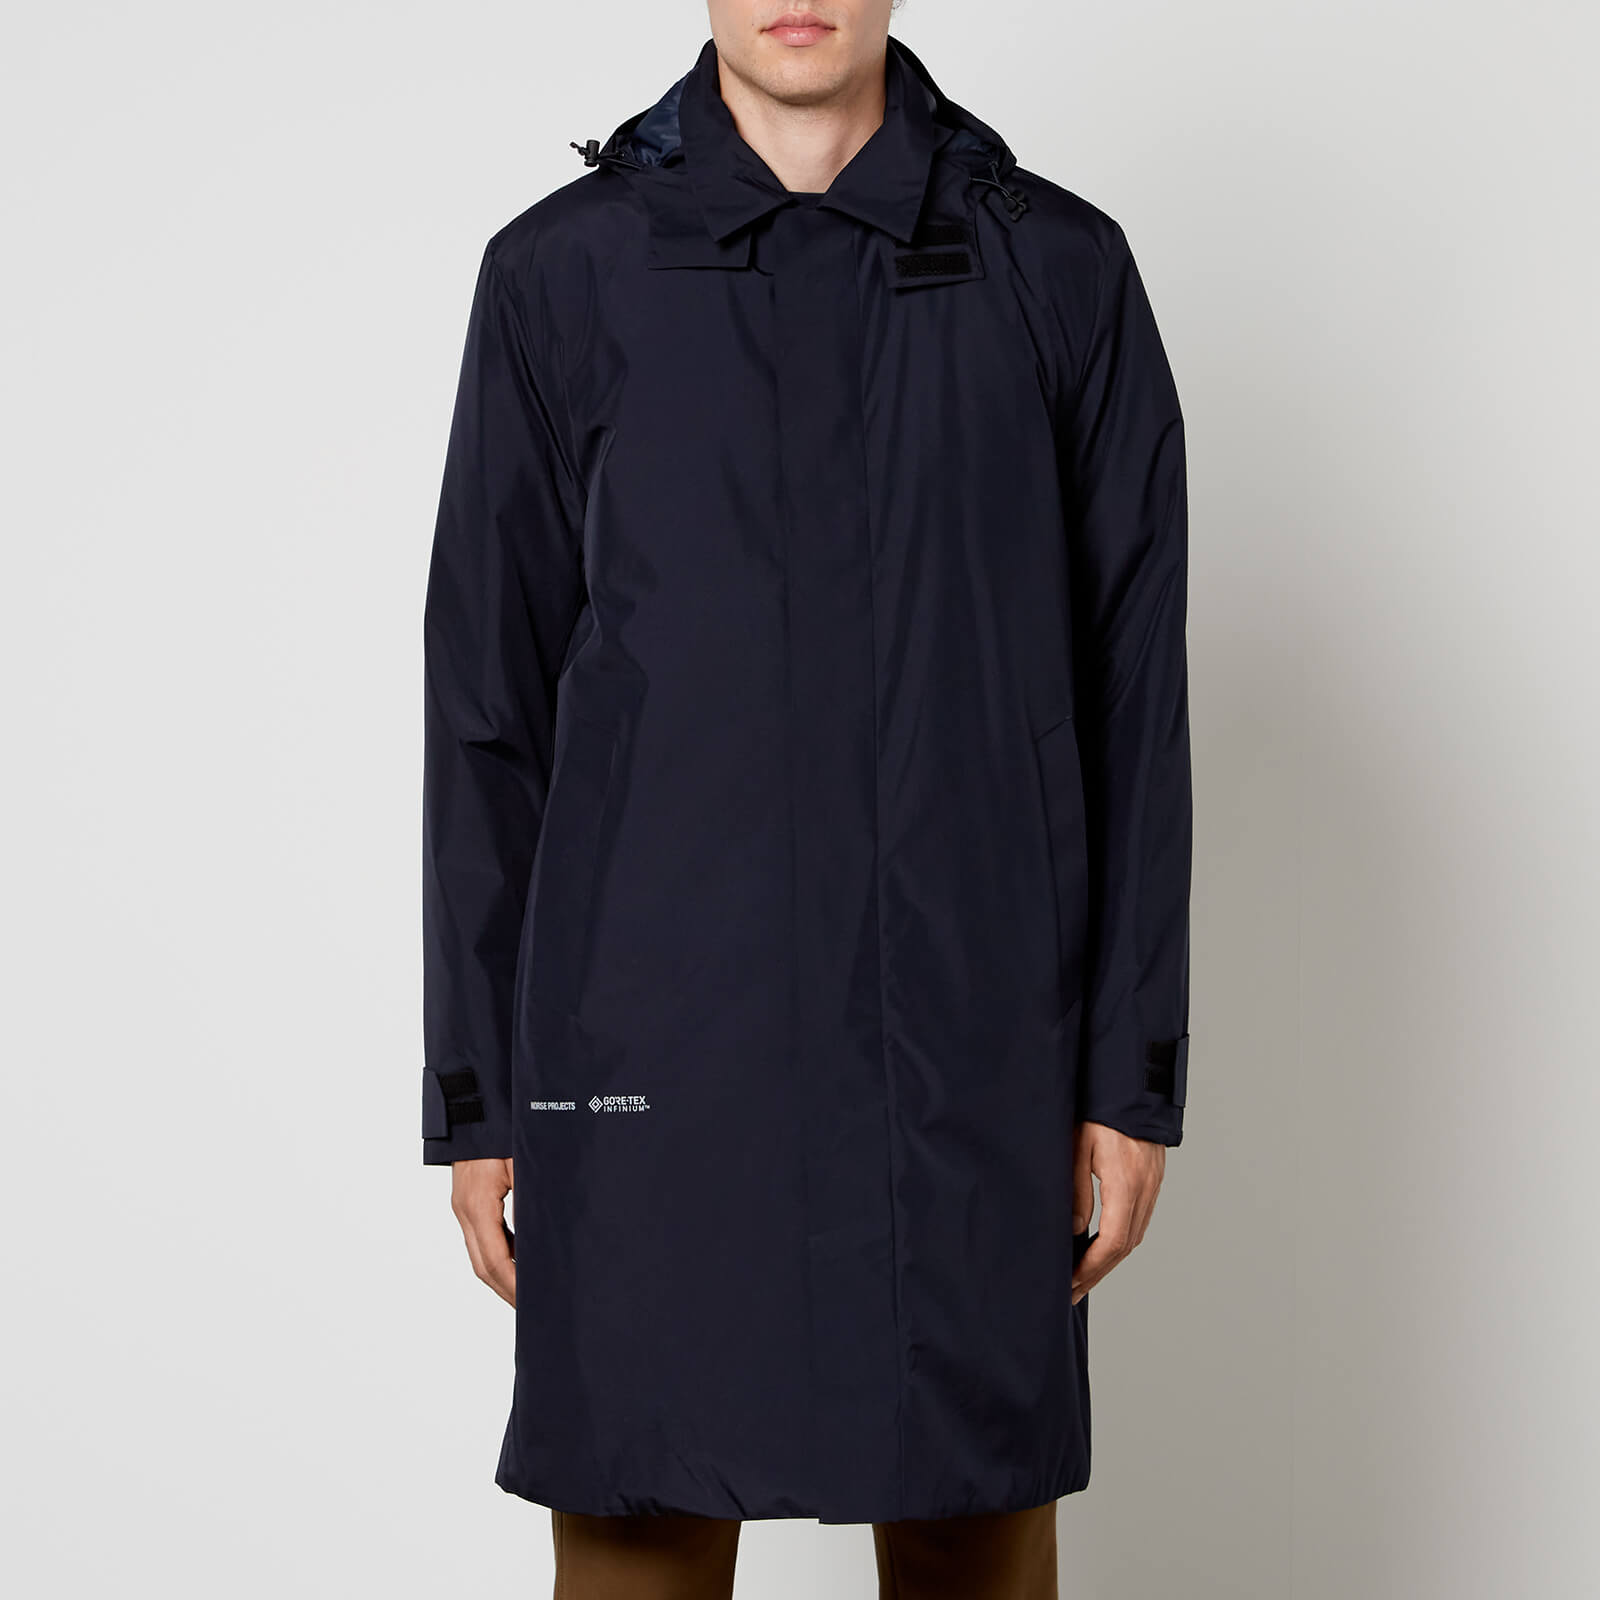 Norse Projects Thor GORE-TEX INFINIUM 2.0 Shell Jacket - L